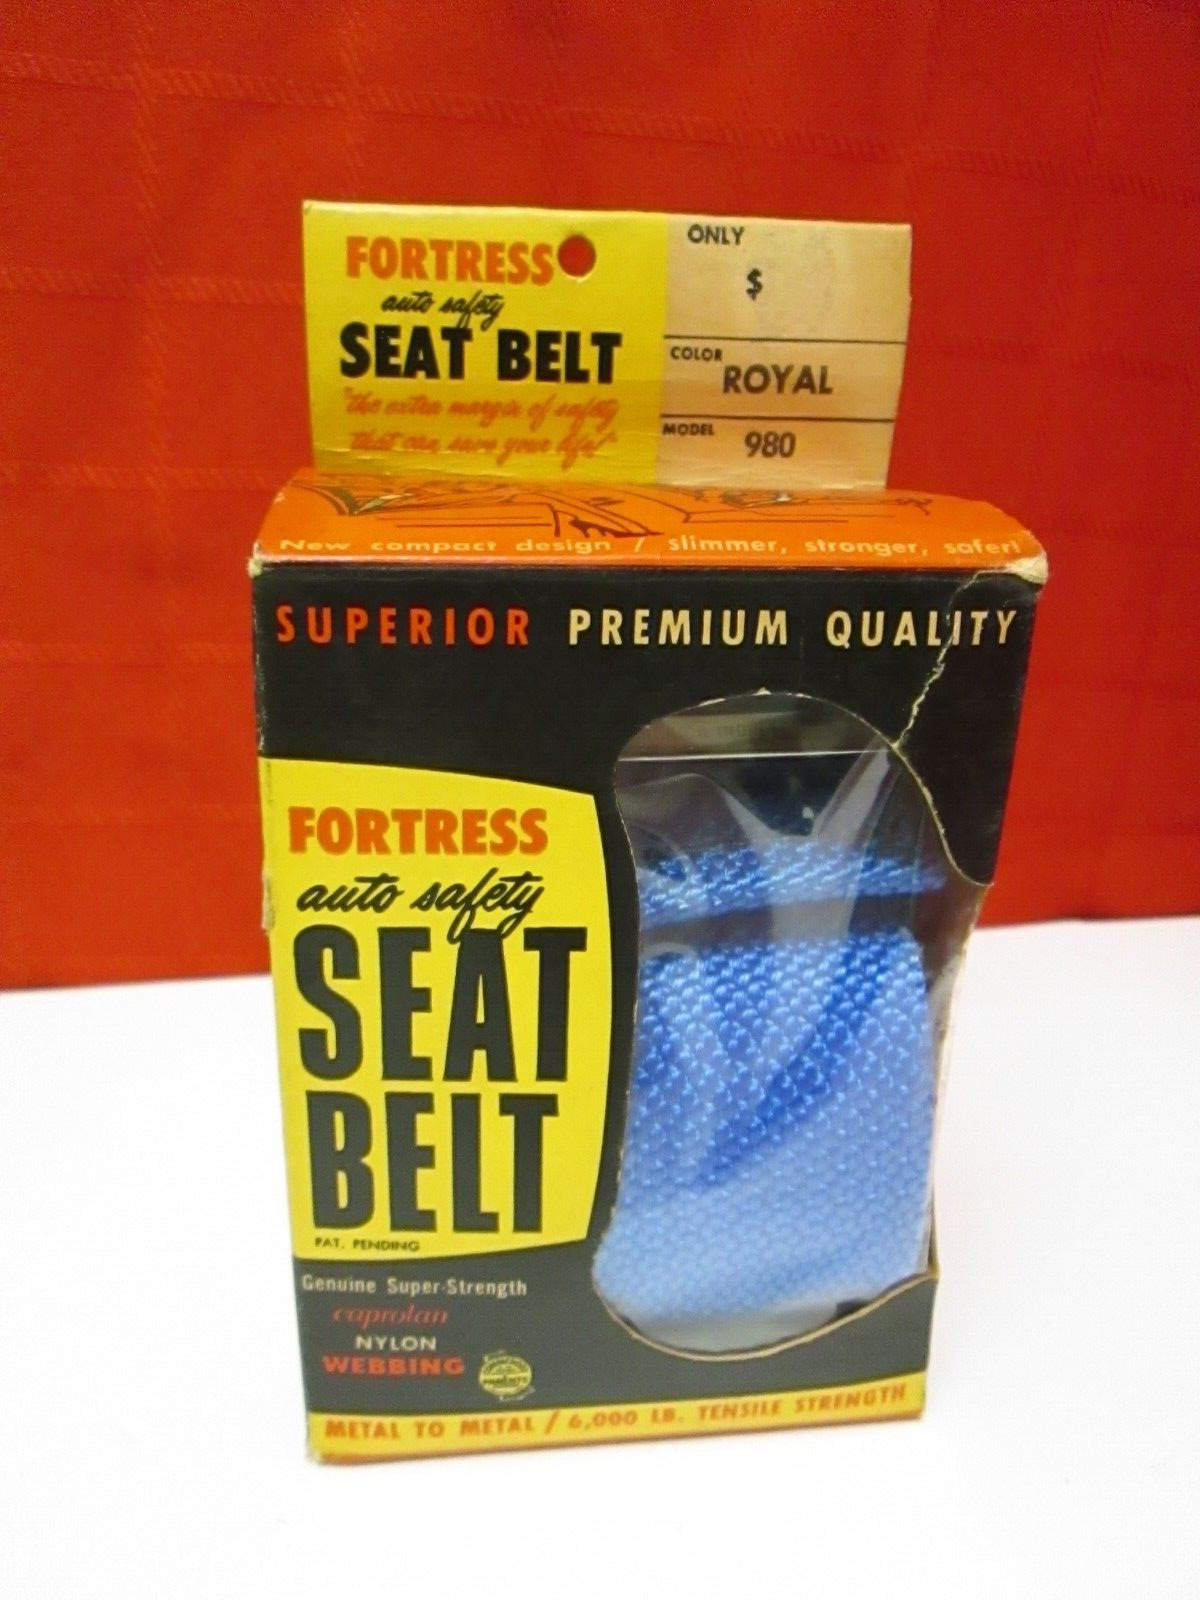 VTG NOS FORTRESS AUTO TRUCK SEATBELT BLUE NEW IN PACKAGE RARE HOT ROD MUSCLE CAR